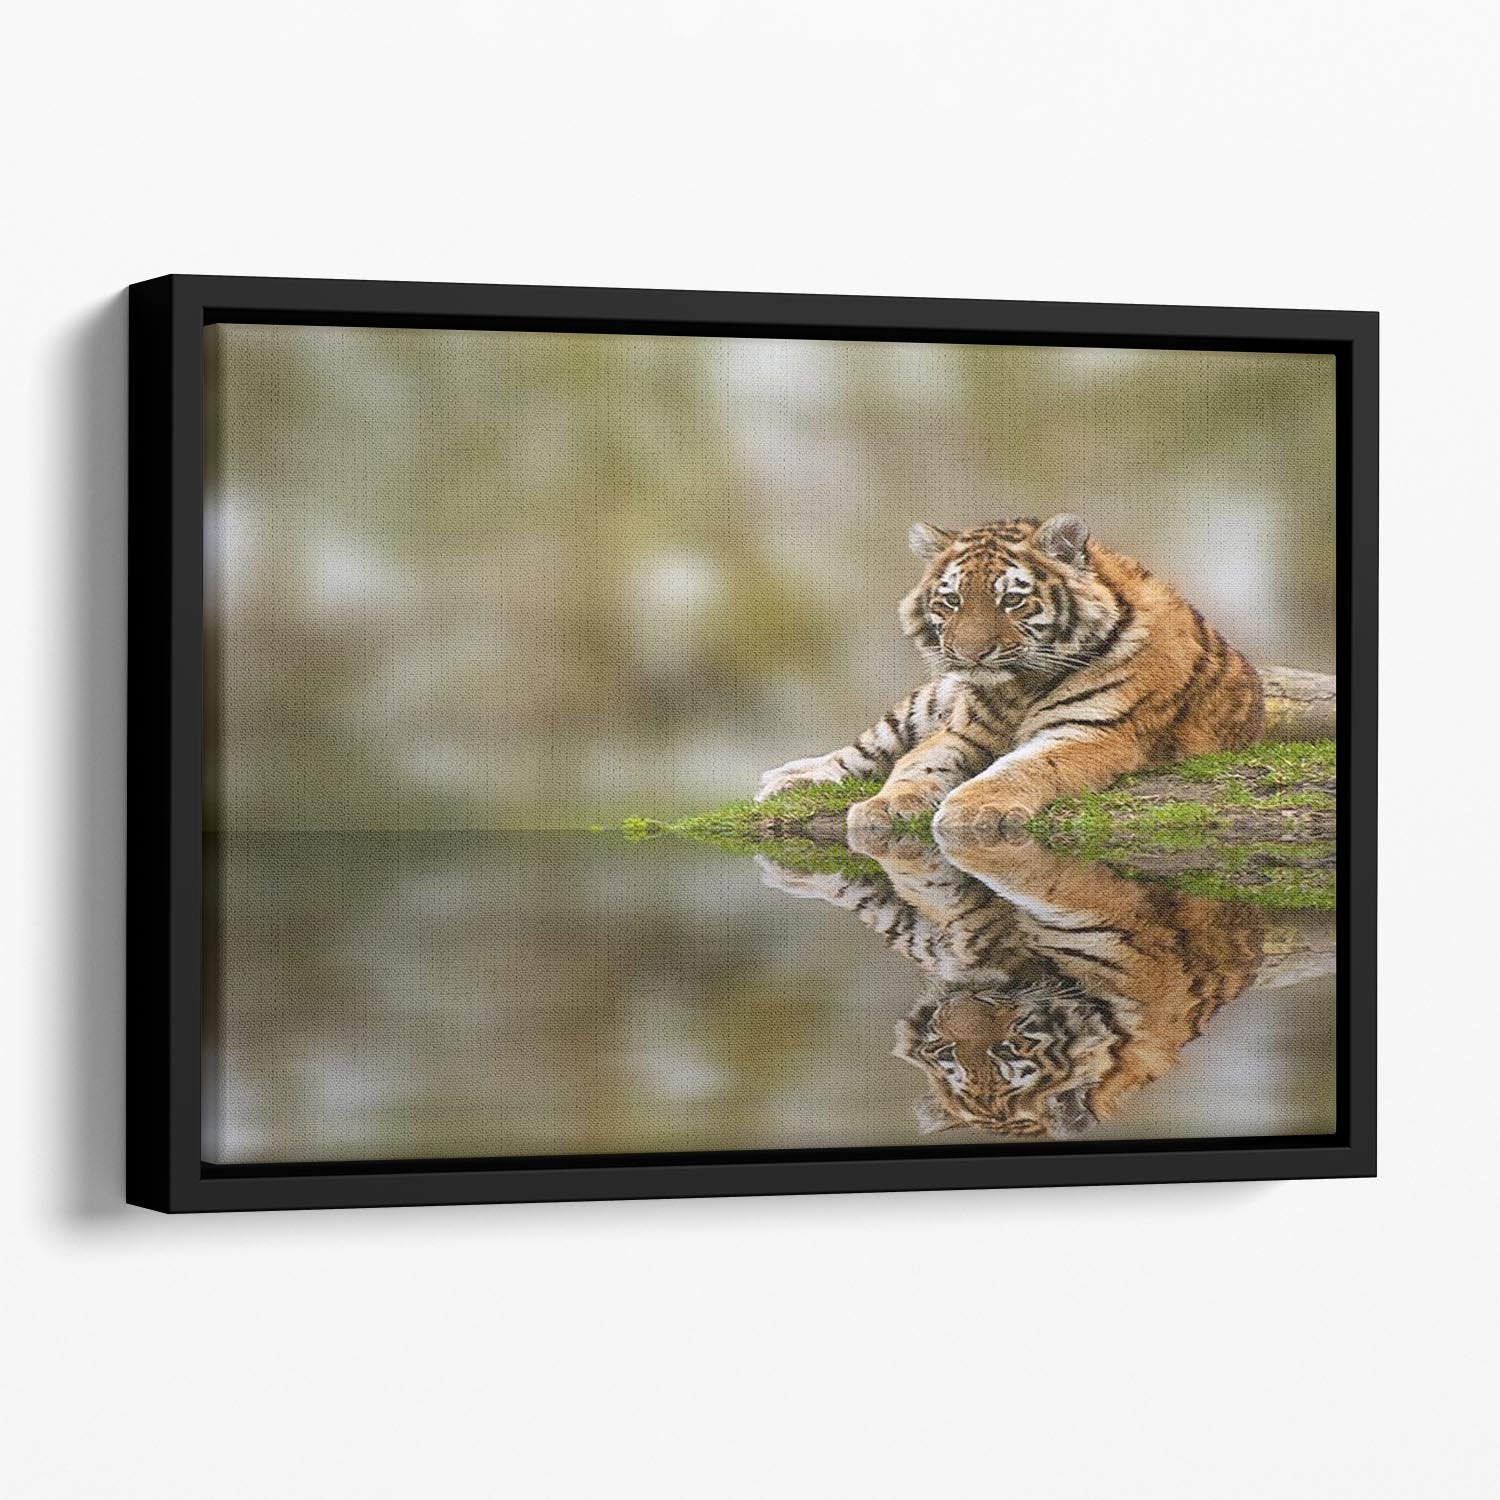 Sttunning tiger cub relaxing on a warm day Floating Framed Canvas - Canvas Art Rocks - 1